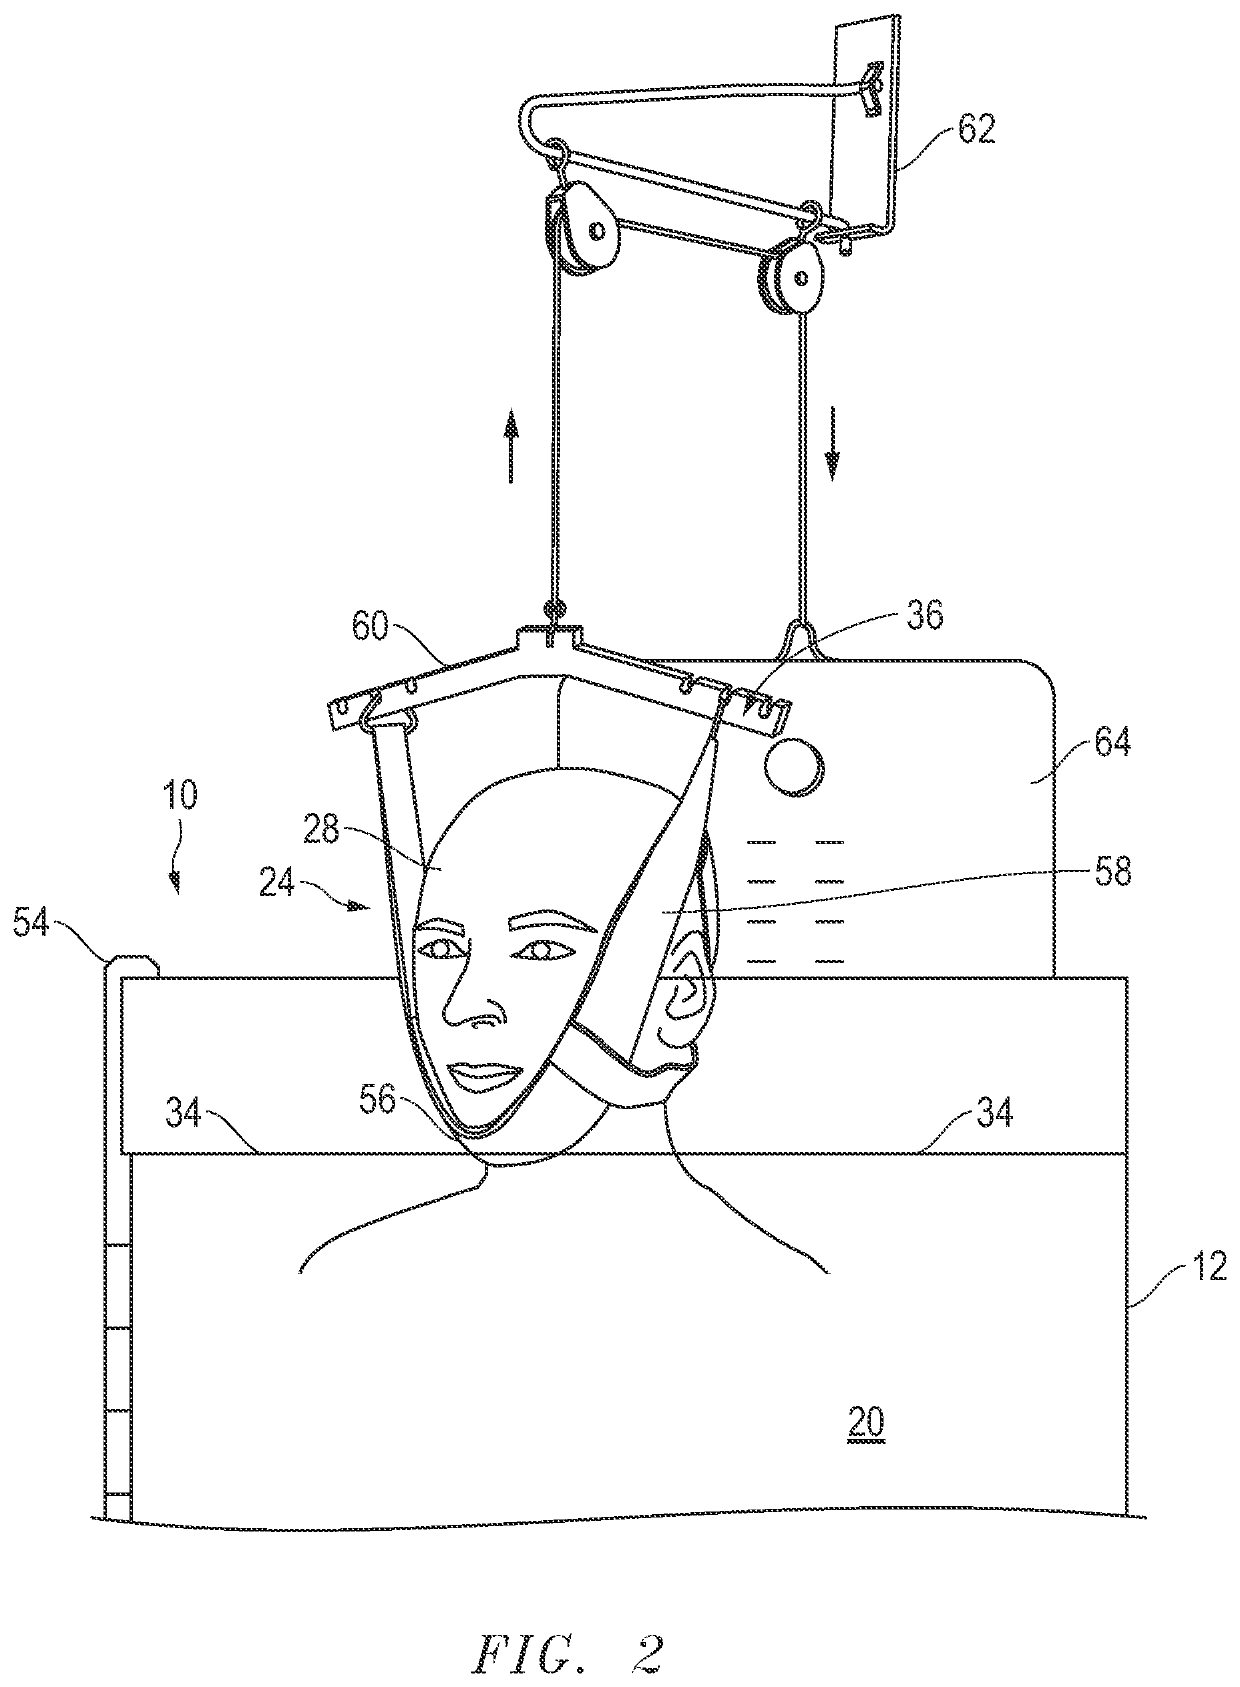 Lung exercise apparatus and method